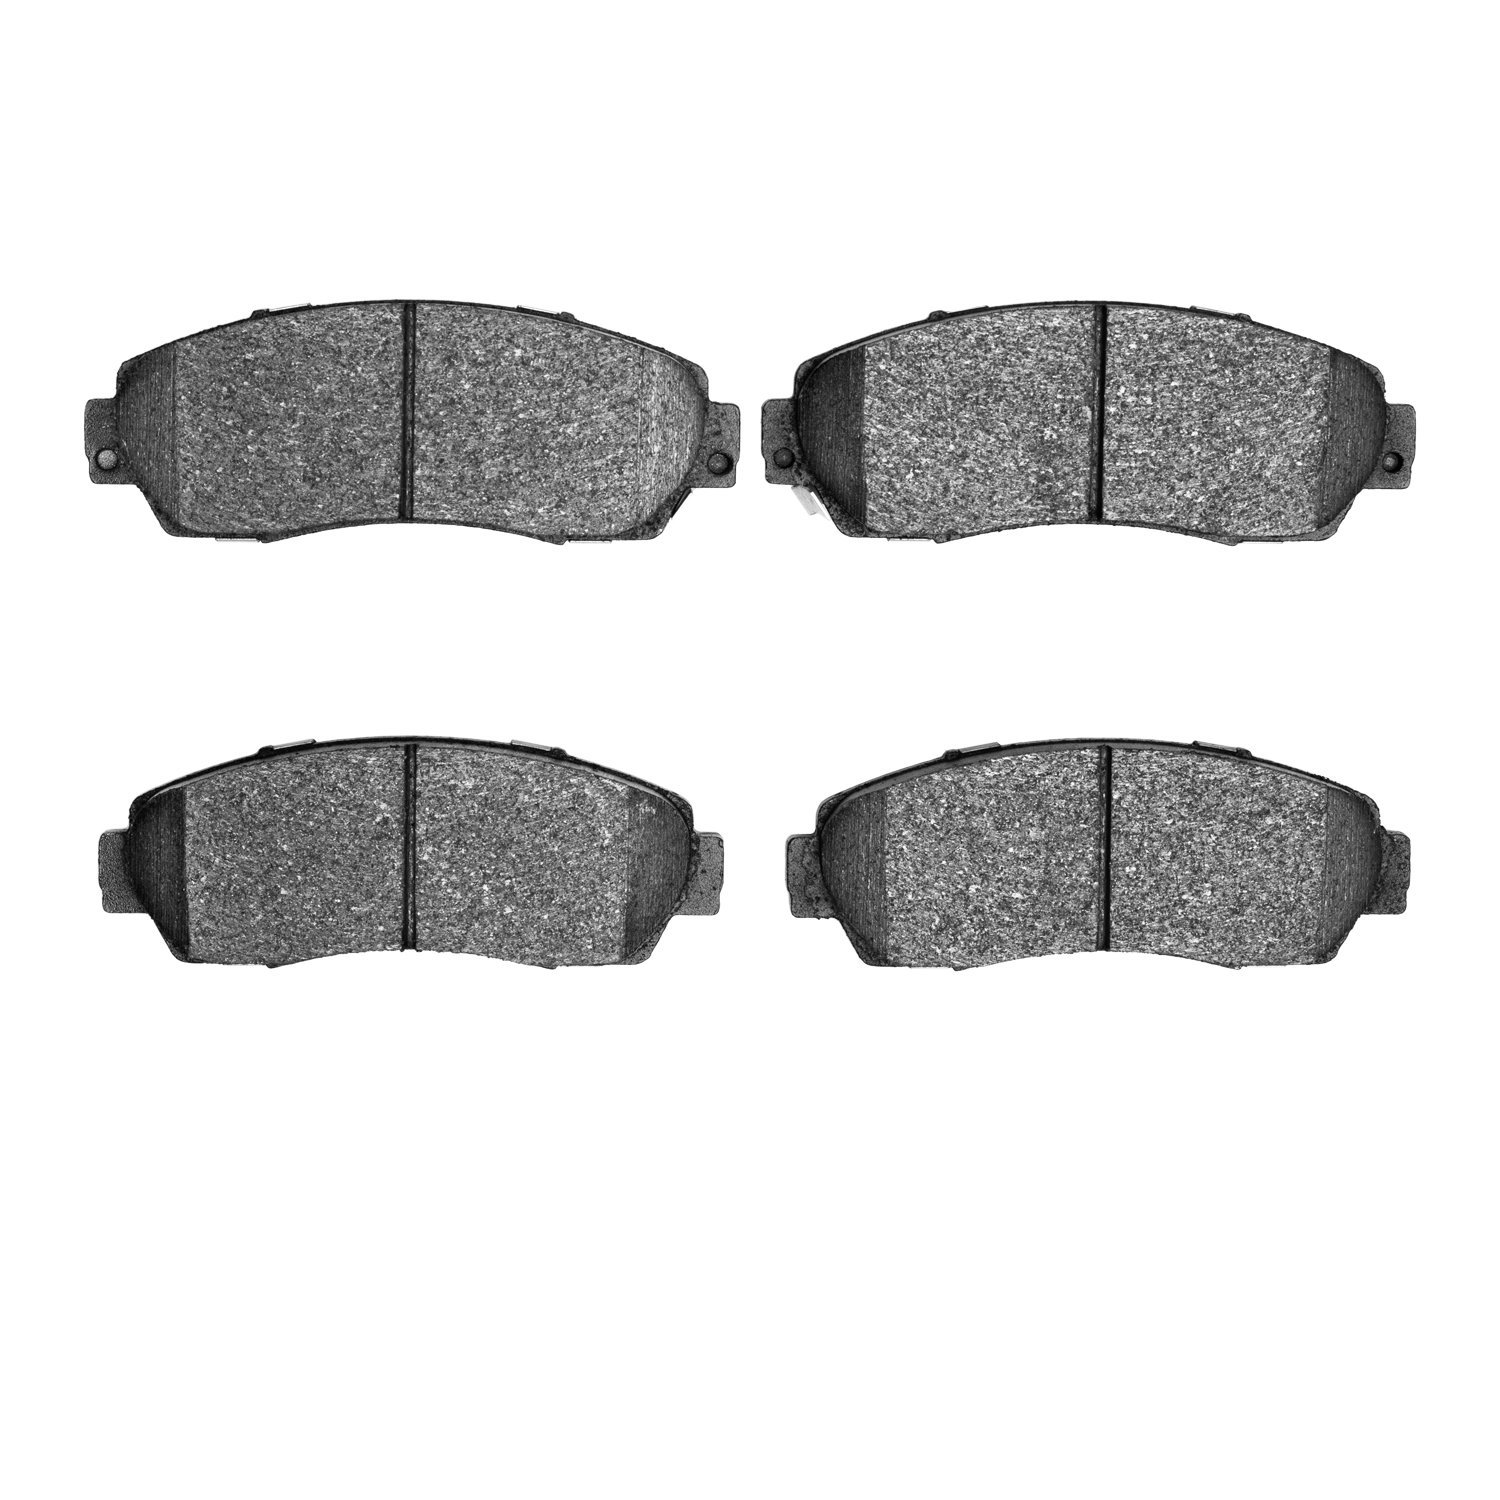 1311-1521-00 3000-Series Semi-Metallic Brake Pads, Fits Select Multiple Makes/Models, Position: Front